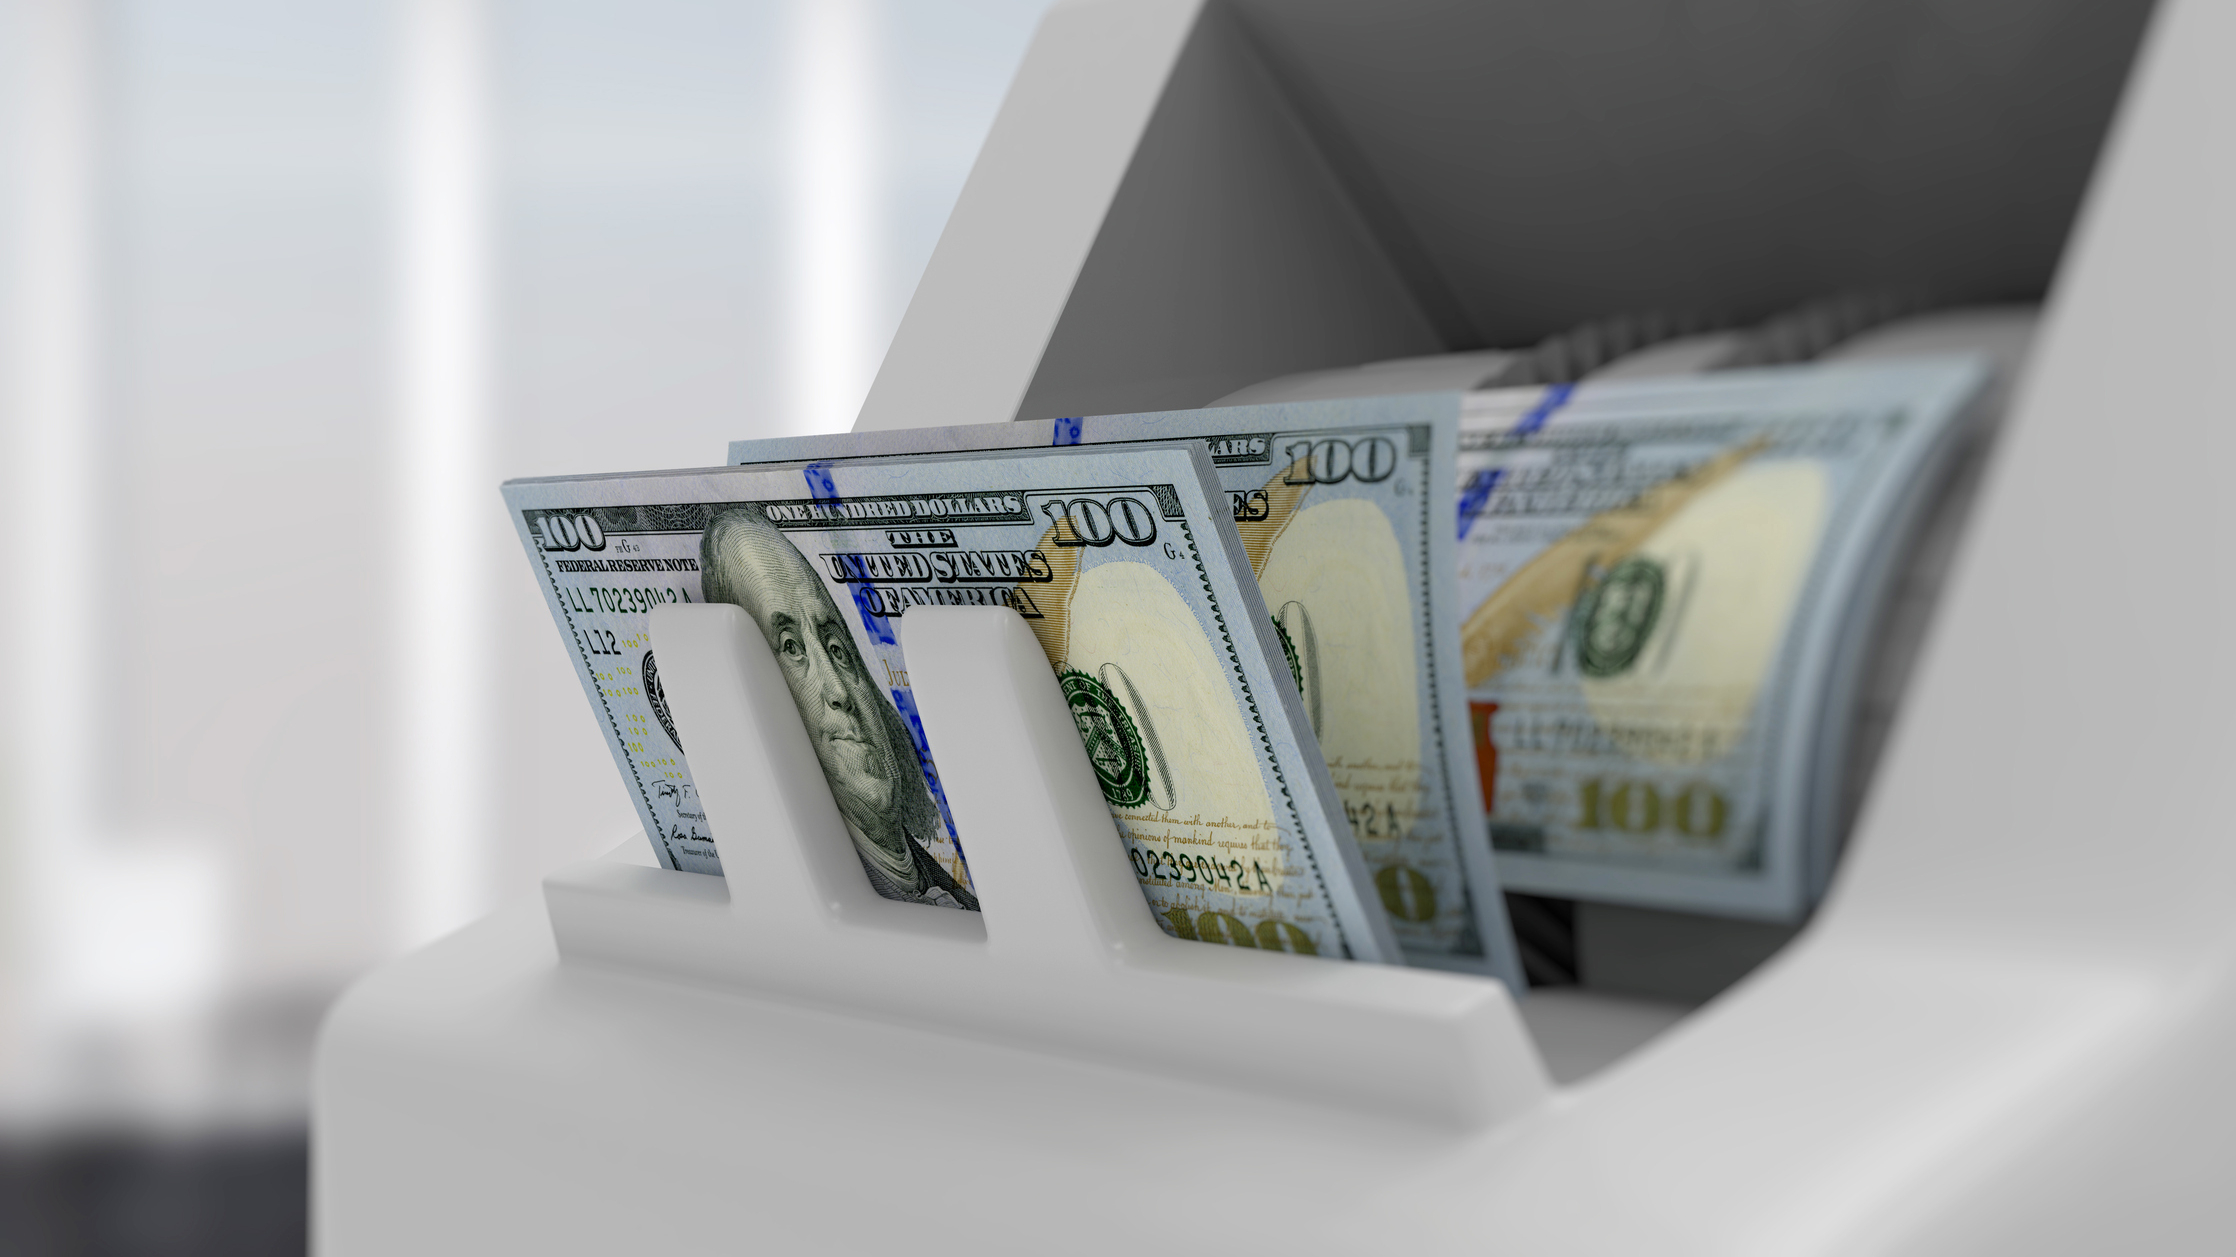 Image of cash in a TCR. QSI, Inc. is a full-service provider of ATMs, ITMs, self-service technology and branch solutions, physical and logical security, maintenance and cash management for financial institutions, specializing in the community marketplace.